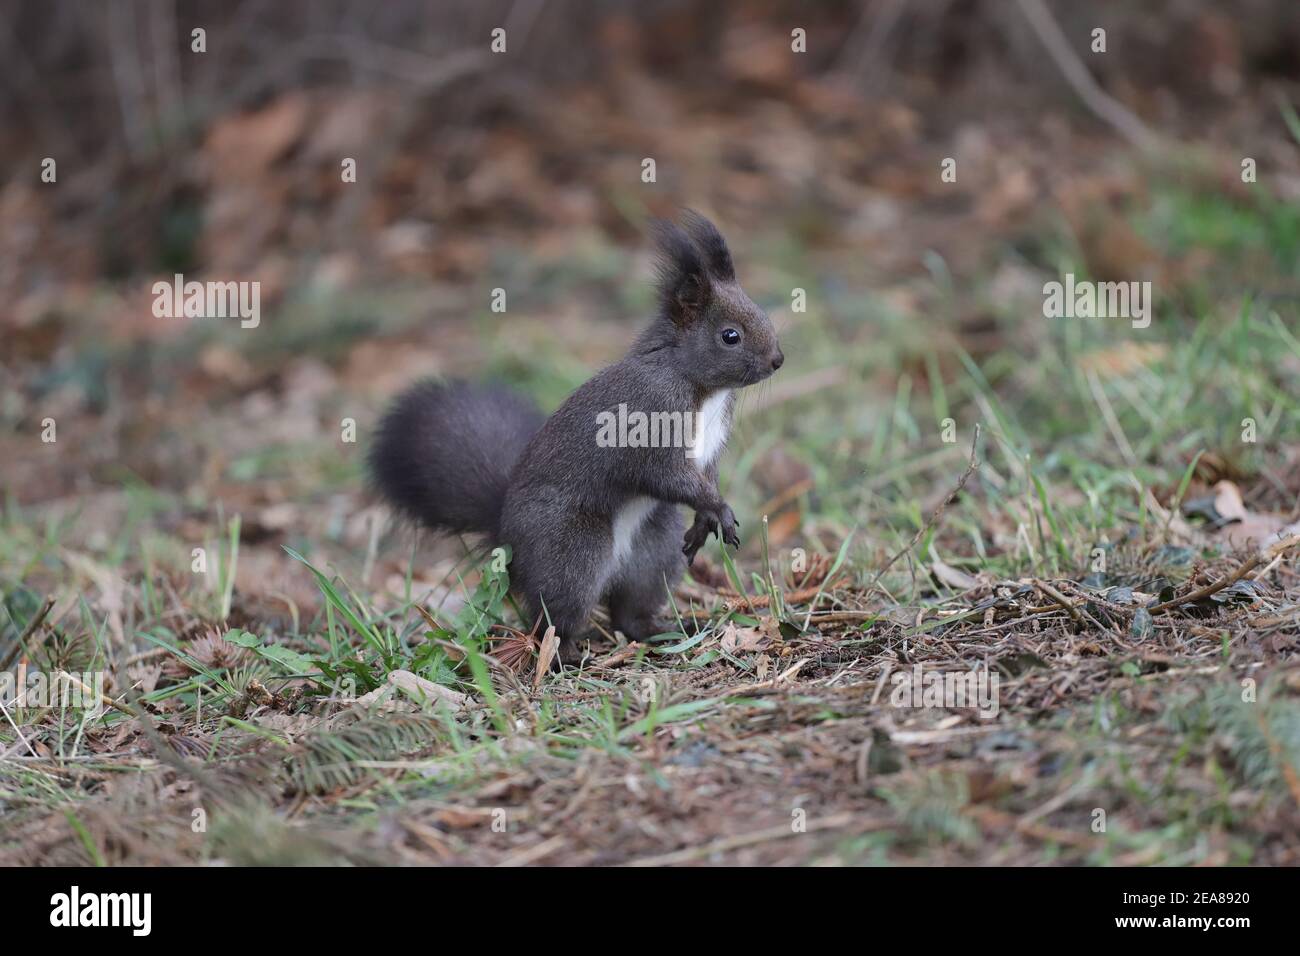 Squirrel stands on the ground upright Stock Photo